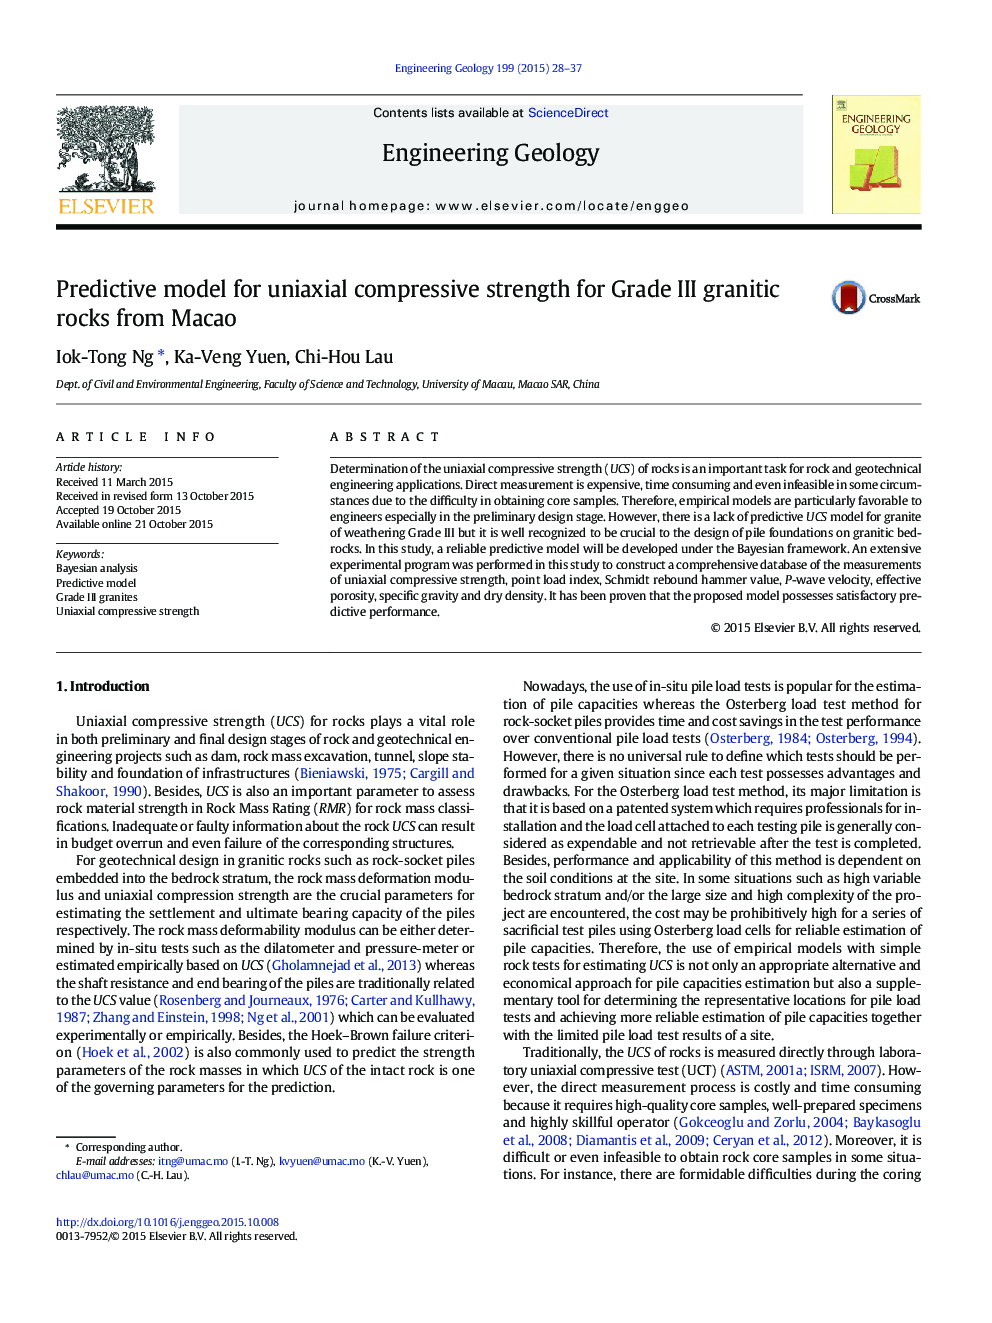 Predictive model for uniaxial compressive strength for Grade III granitic rocks from Macao